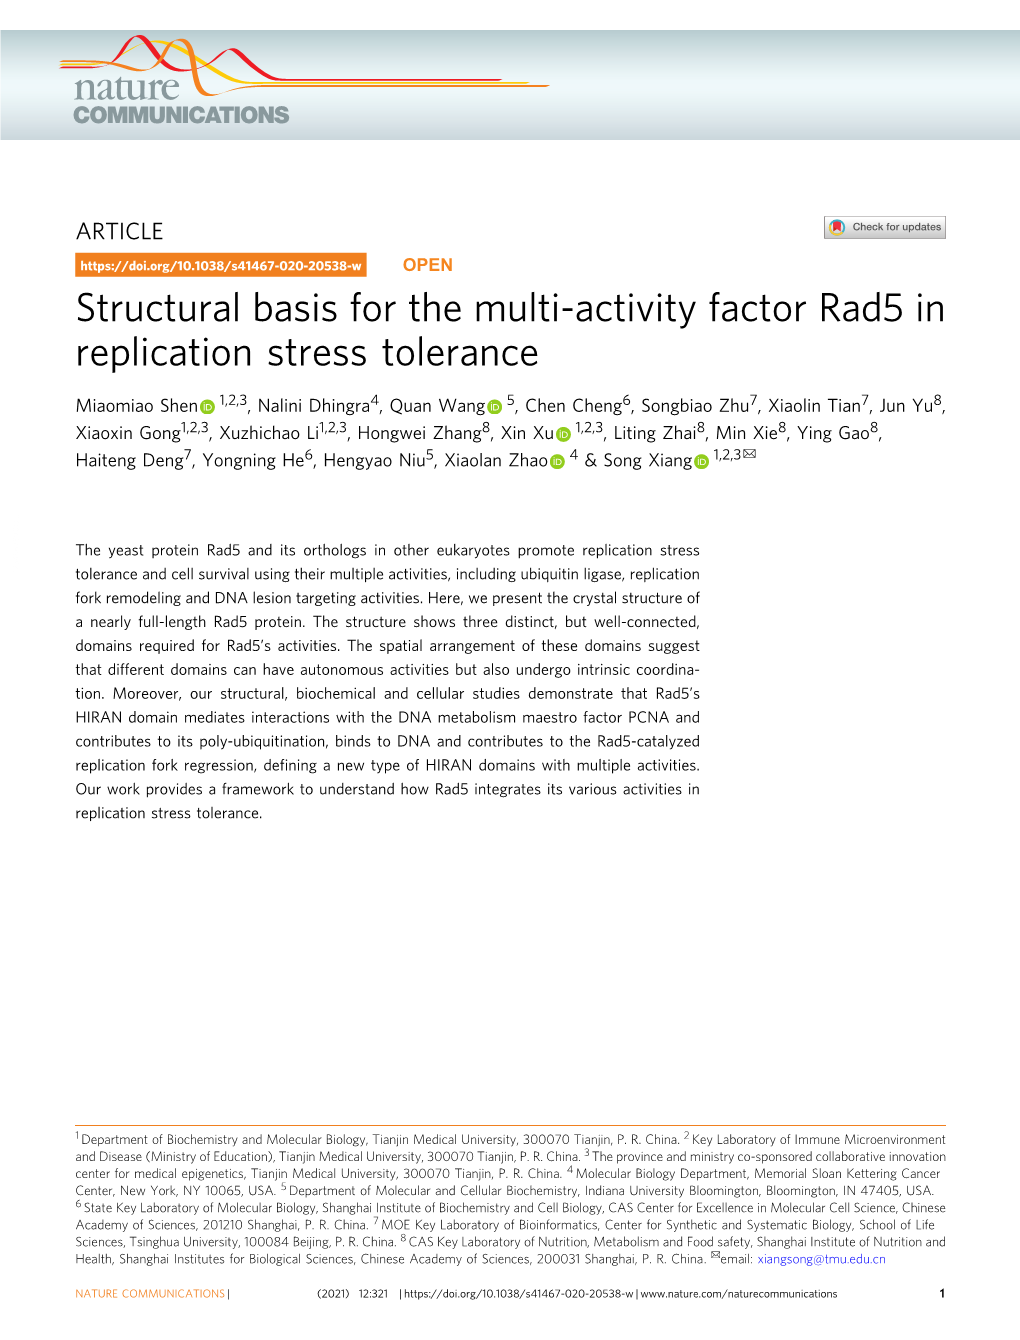 Structural Basis for the Multi-Activity Factor Rad5 in Replication Stress Tolerance